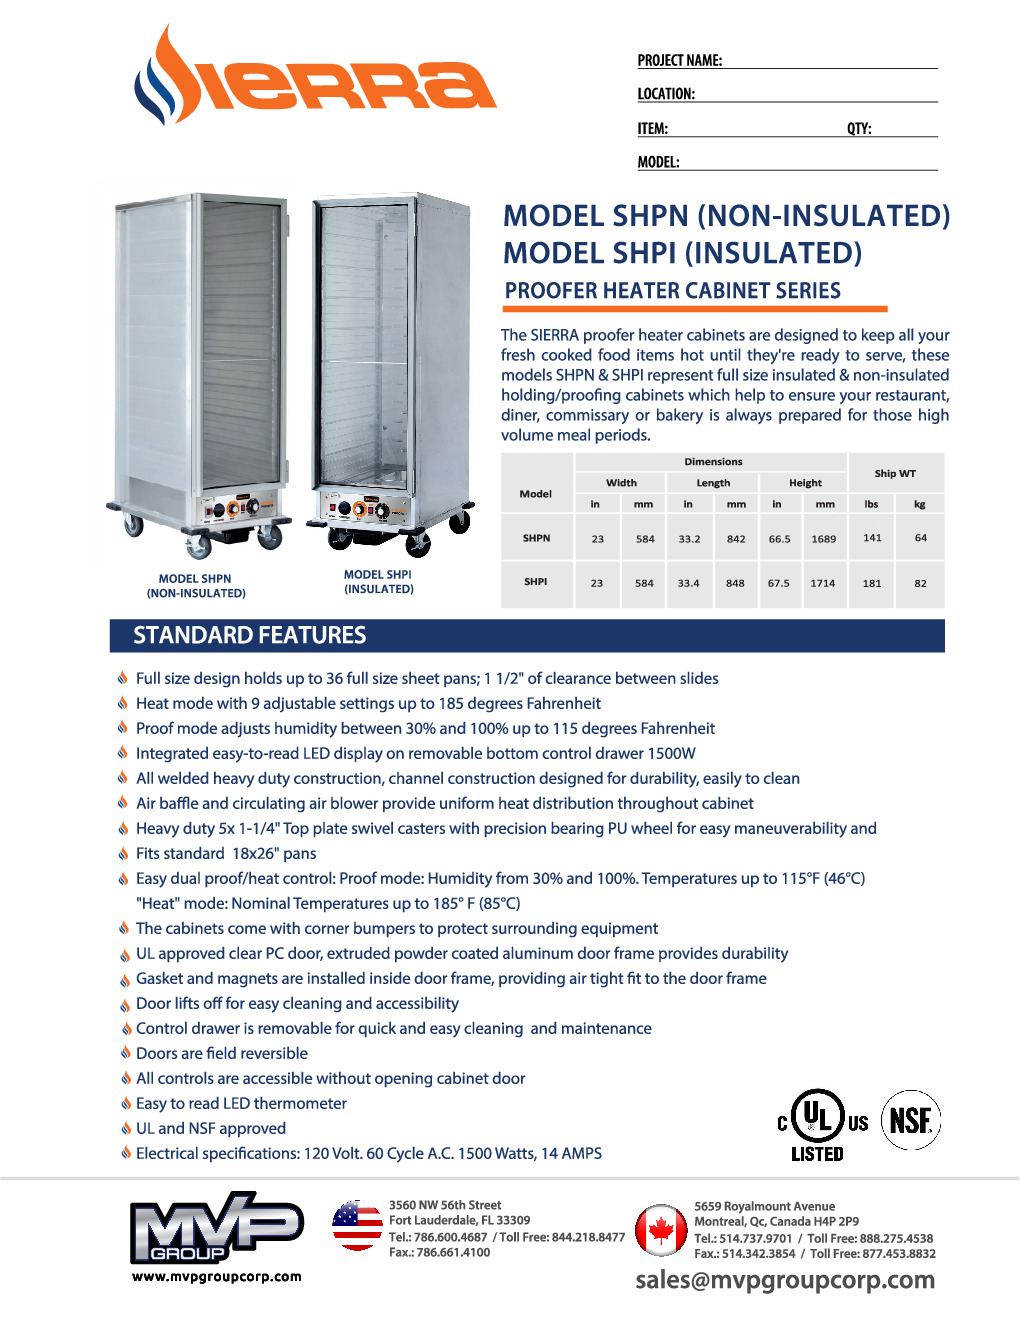 Sierra SHPN Mobile Heated Holding Proofing Cabinet